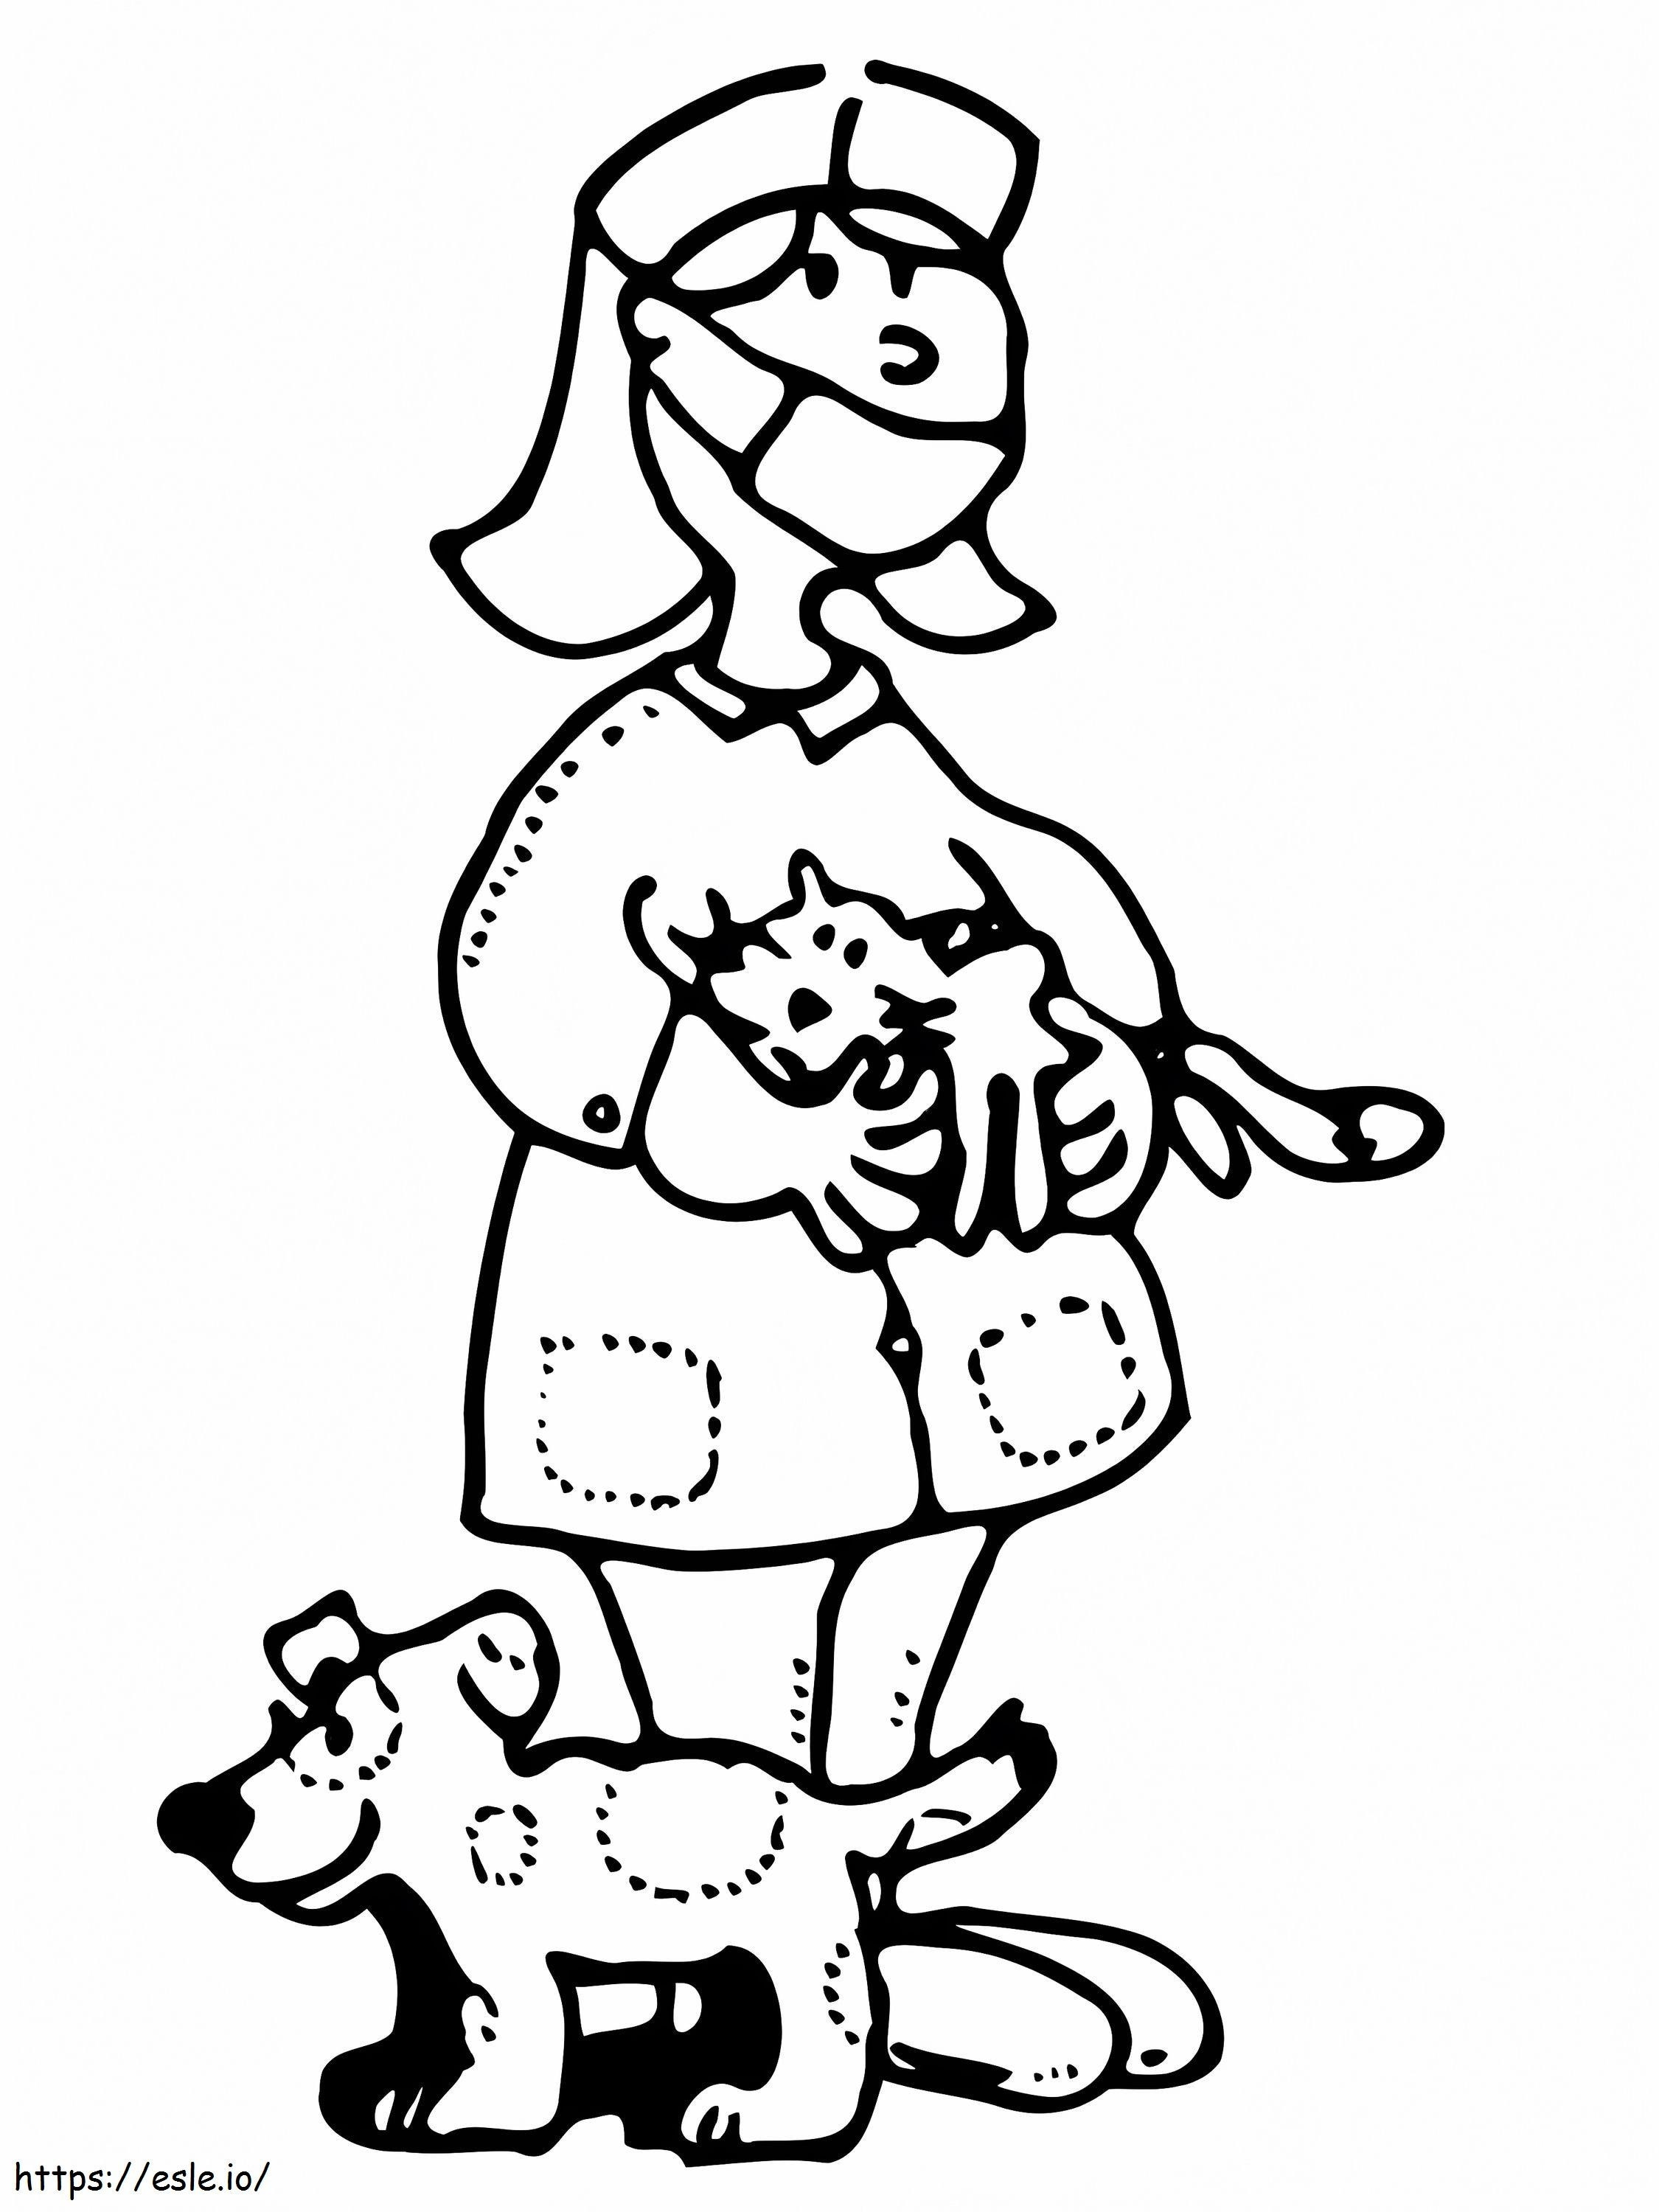 Friendly Veterinarian coloring page